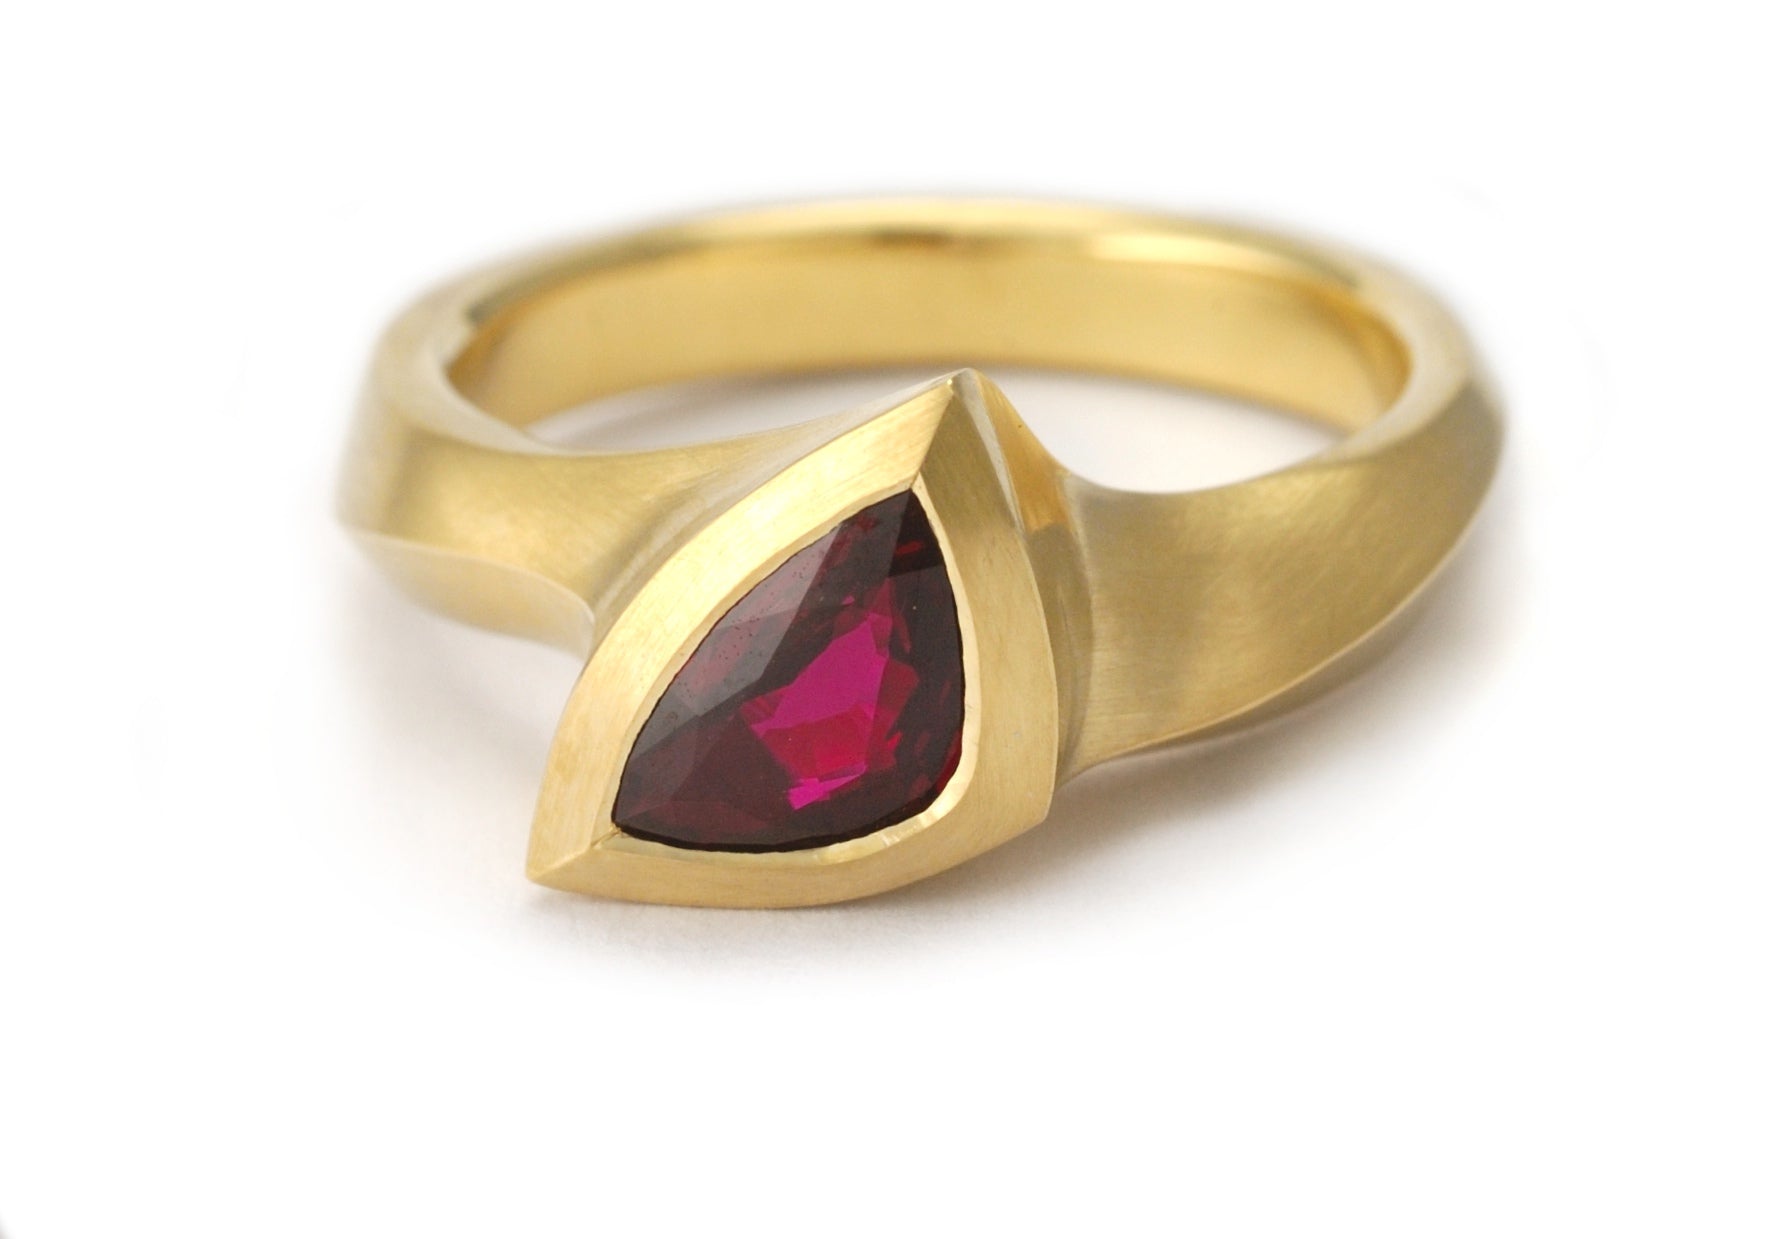 Carved engagement ring in ruby and gold